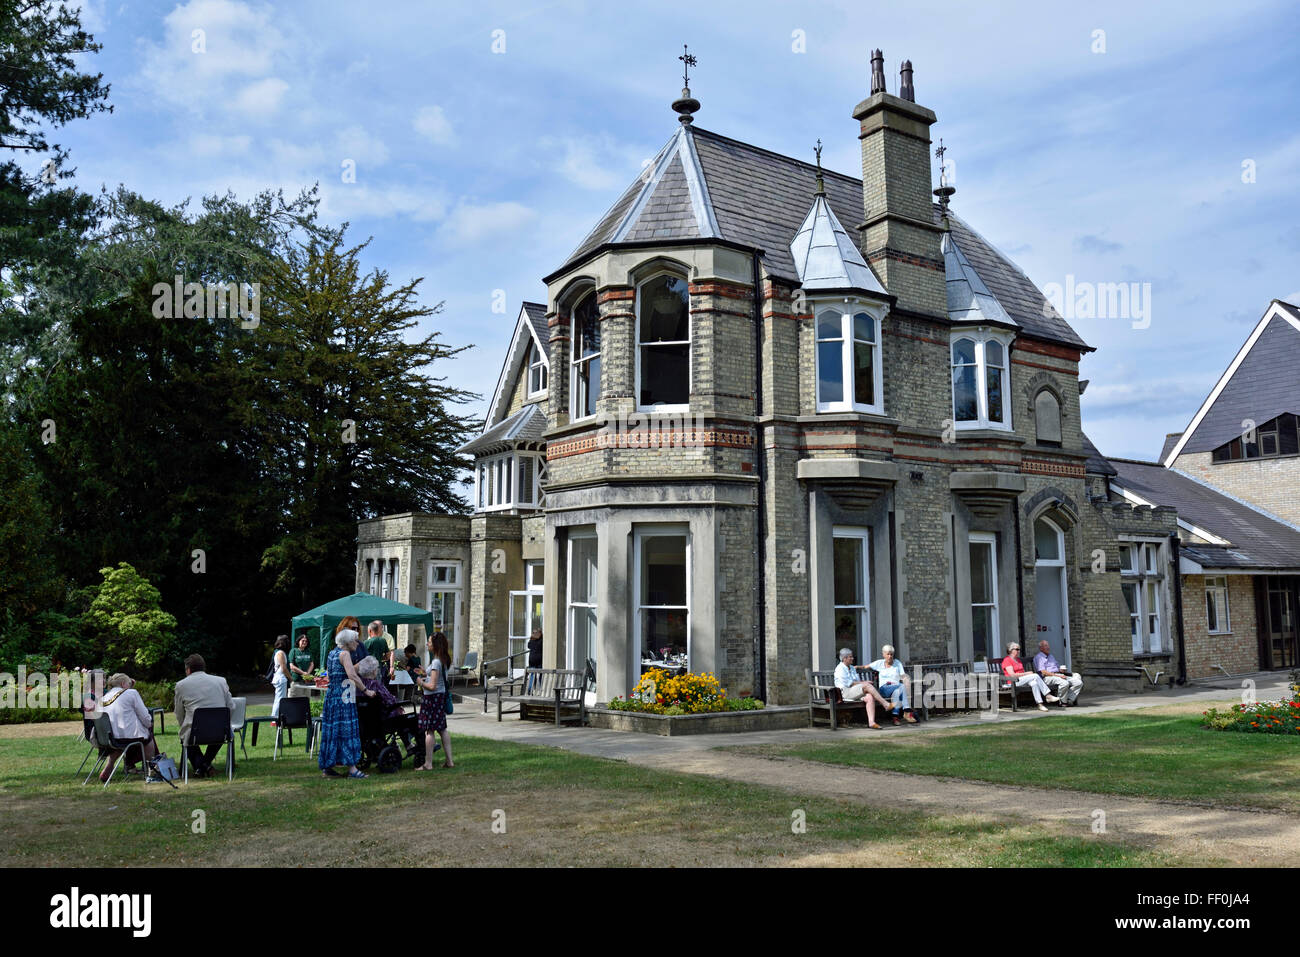 North Bank House a Victorian Villa with people in garden Muswell Hill London Borough of Haringey England Britain UK Stock Photo